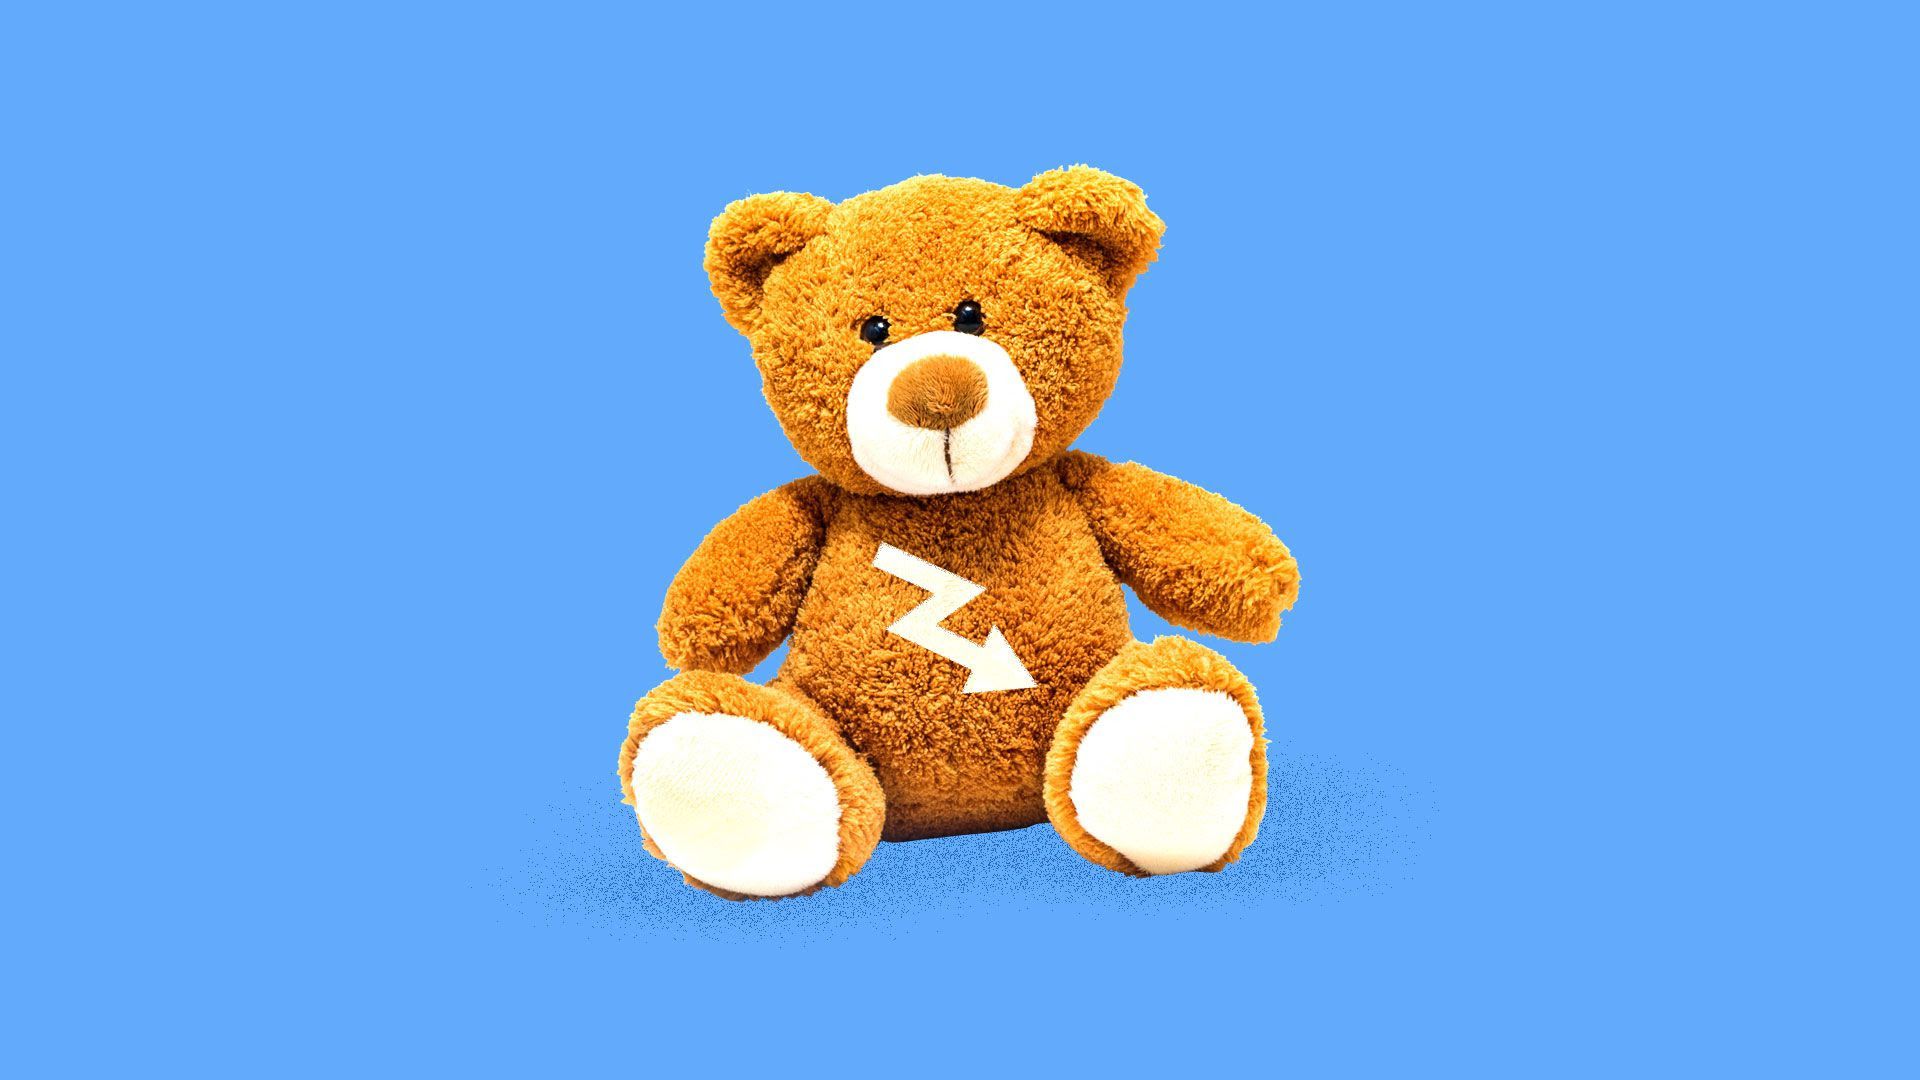 An illustration of a teddy bear with a downward arrow painted on its chest, signaling stock market decline